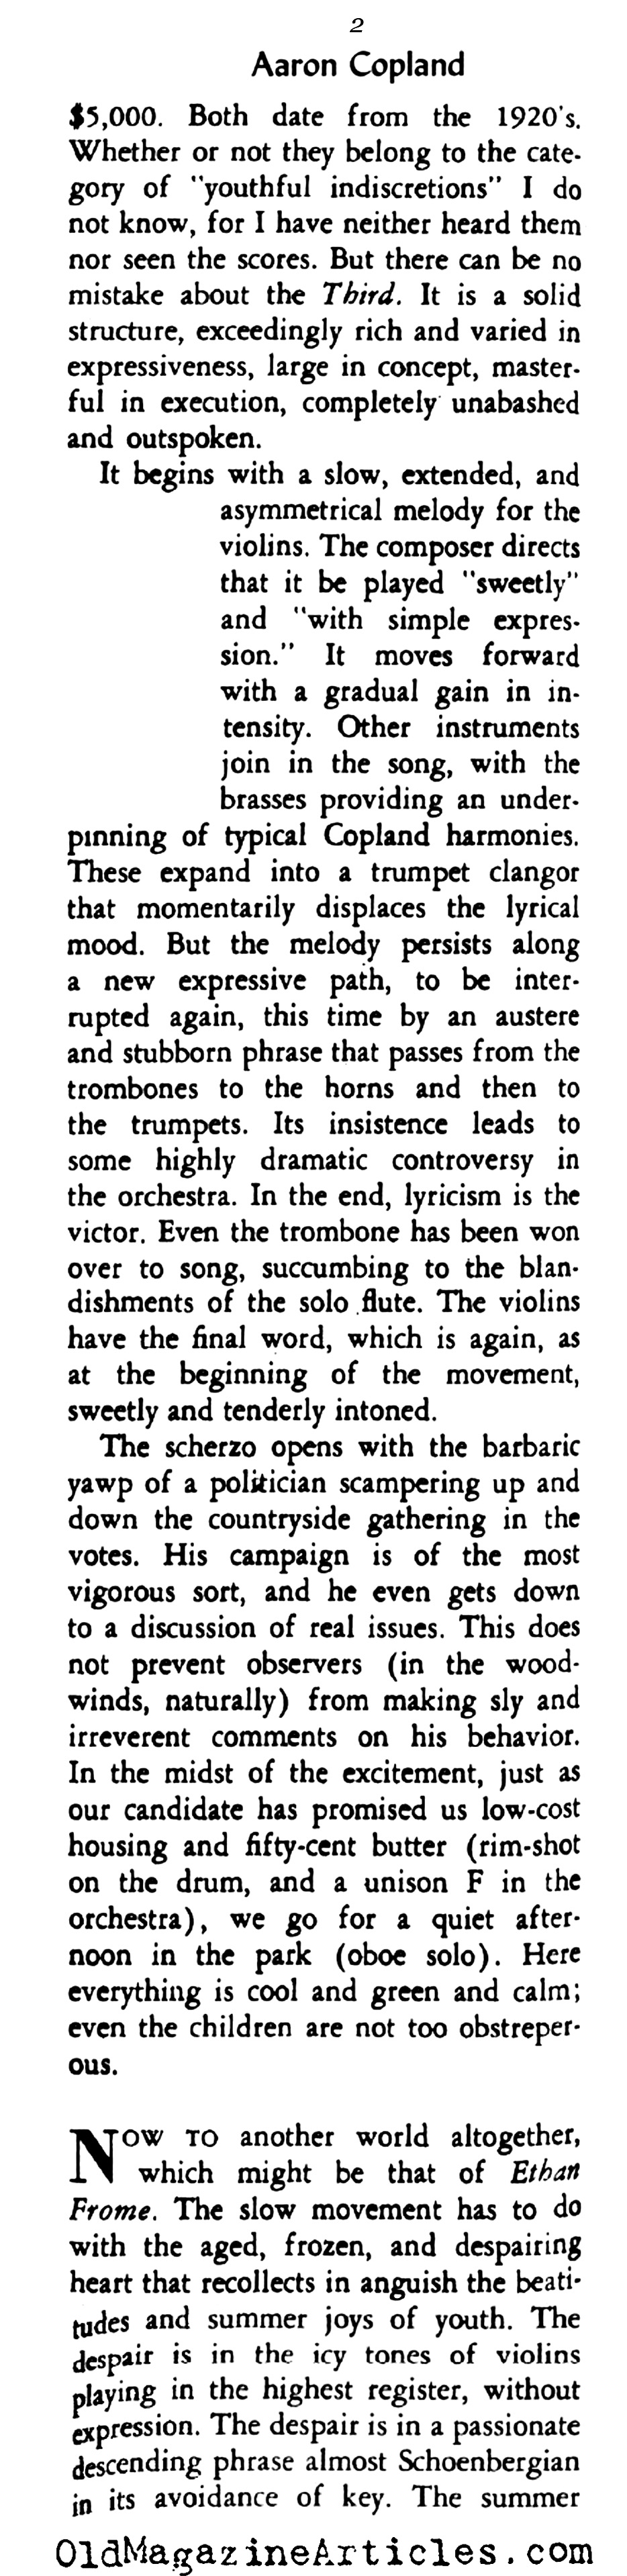 'Third Symphony' by Aaron Copland  (Rob Wagner's Script, 1948)